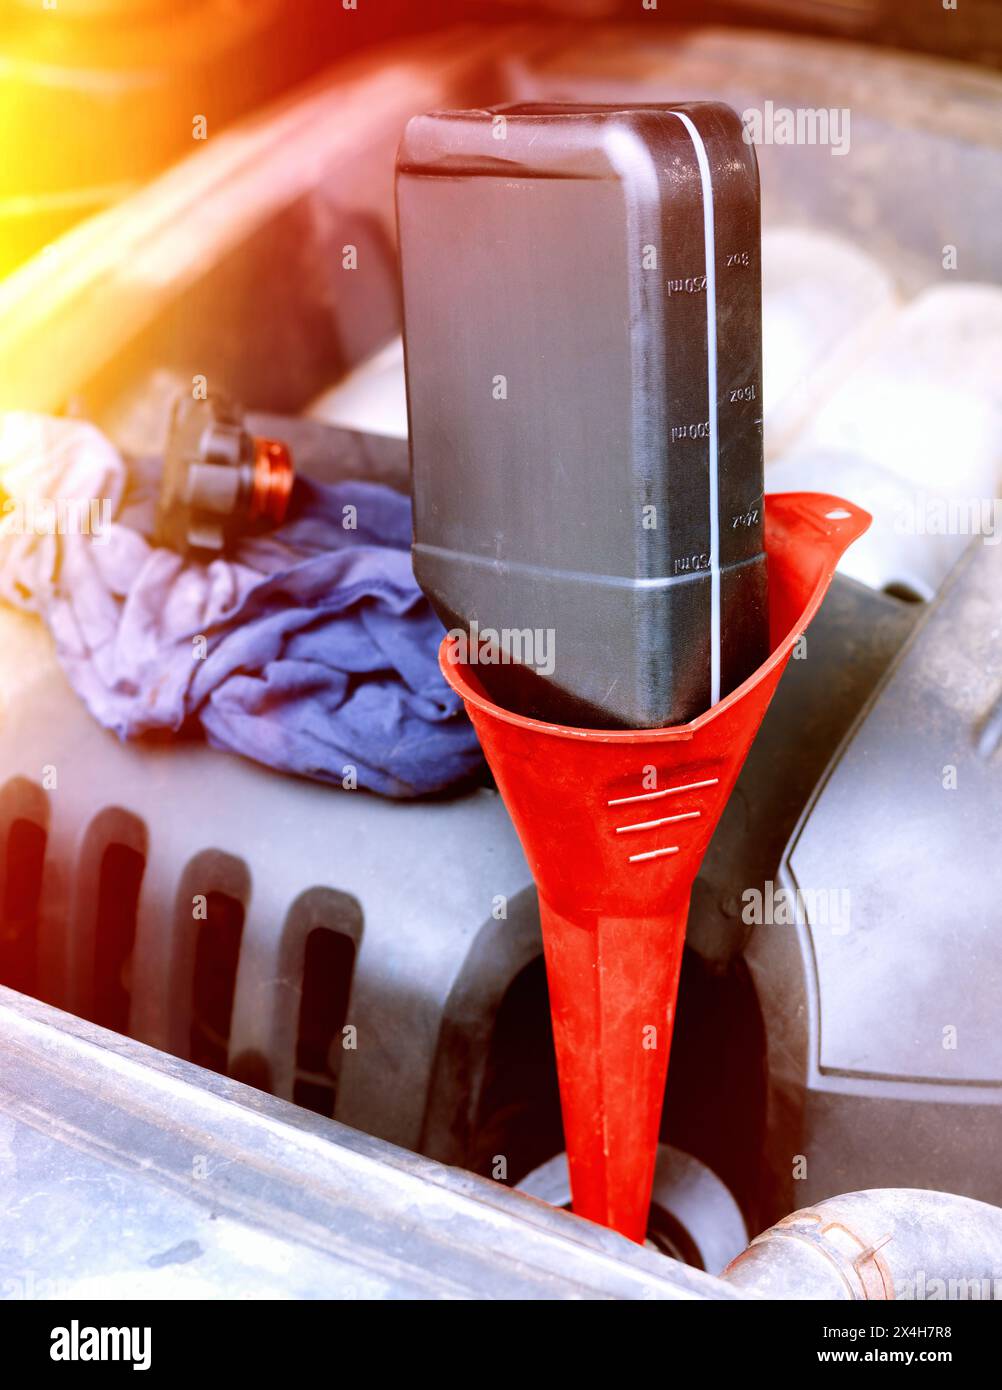 Filling a vehicle's engine with motor oil through a funnel Stock Photo